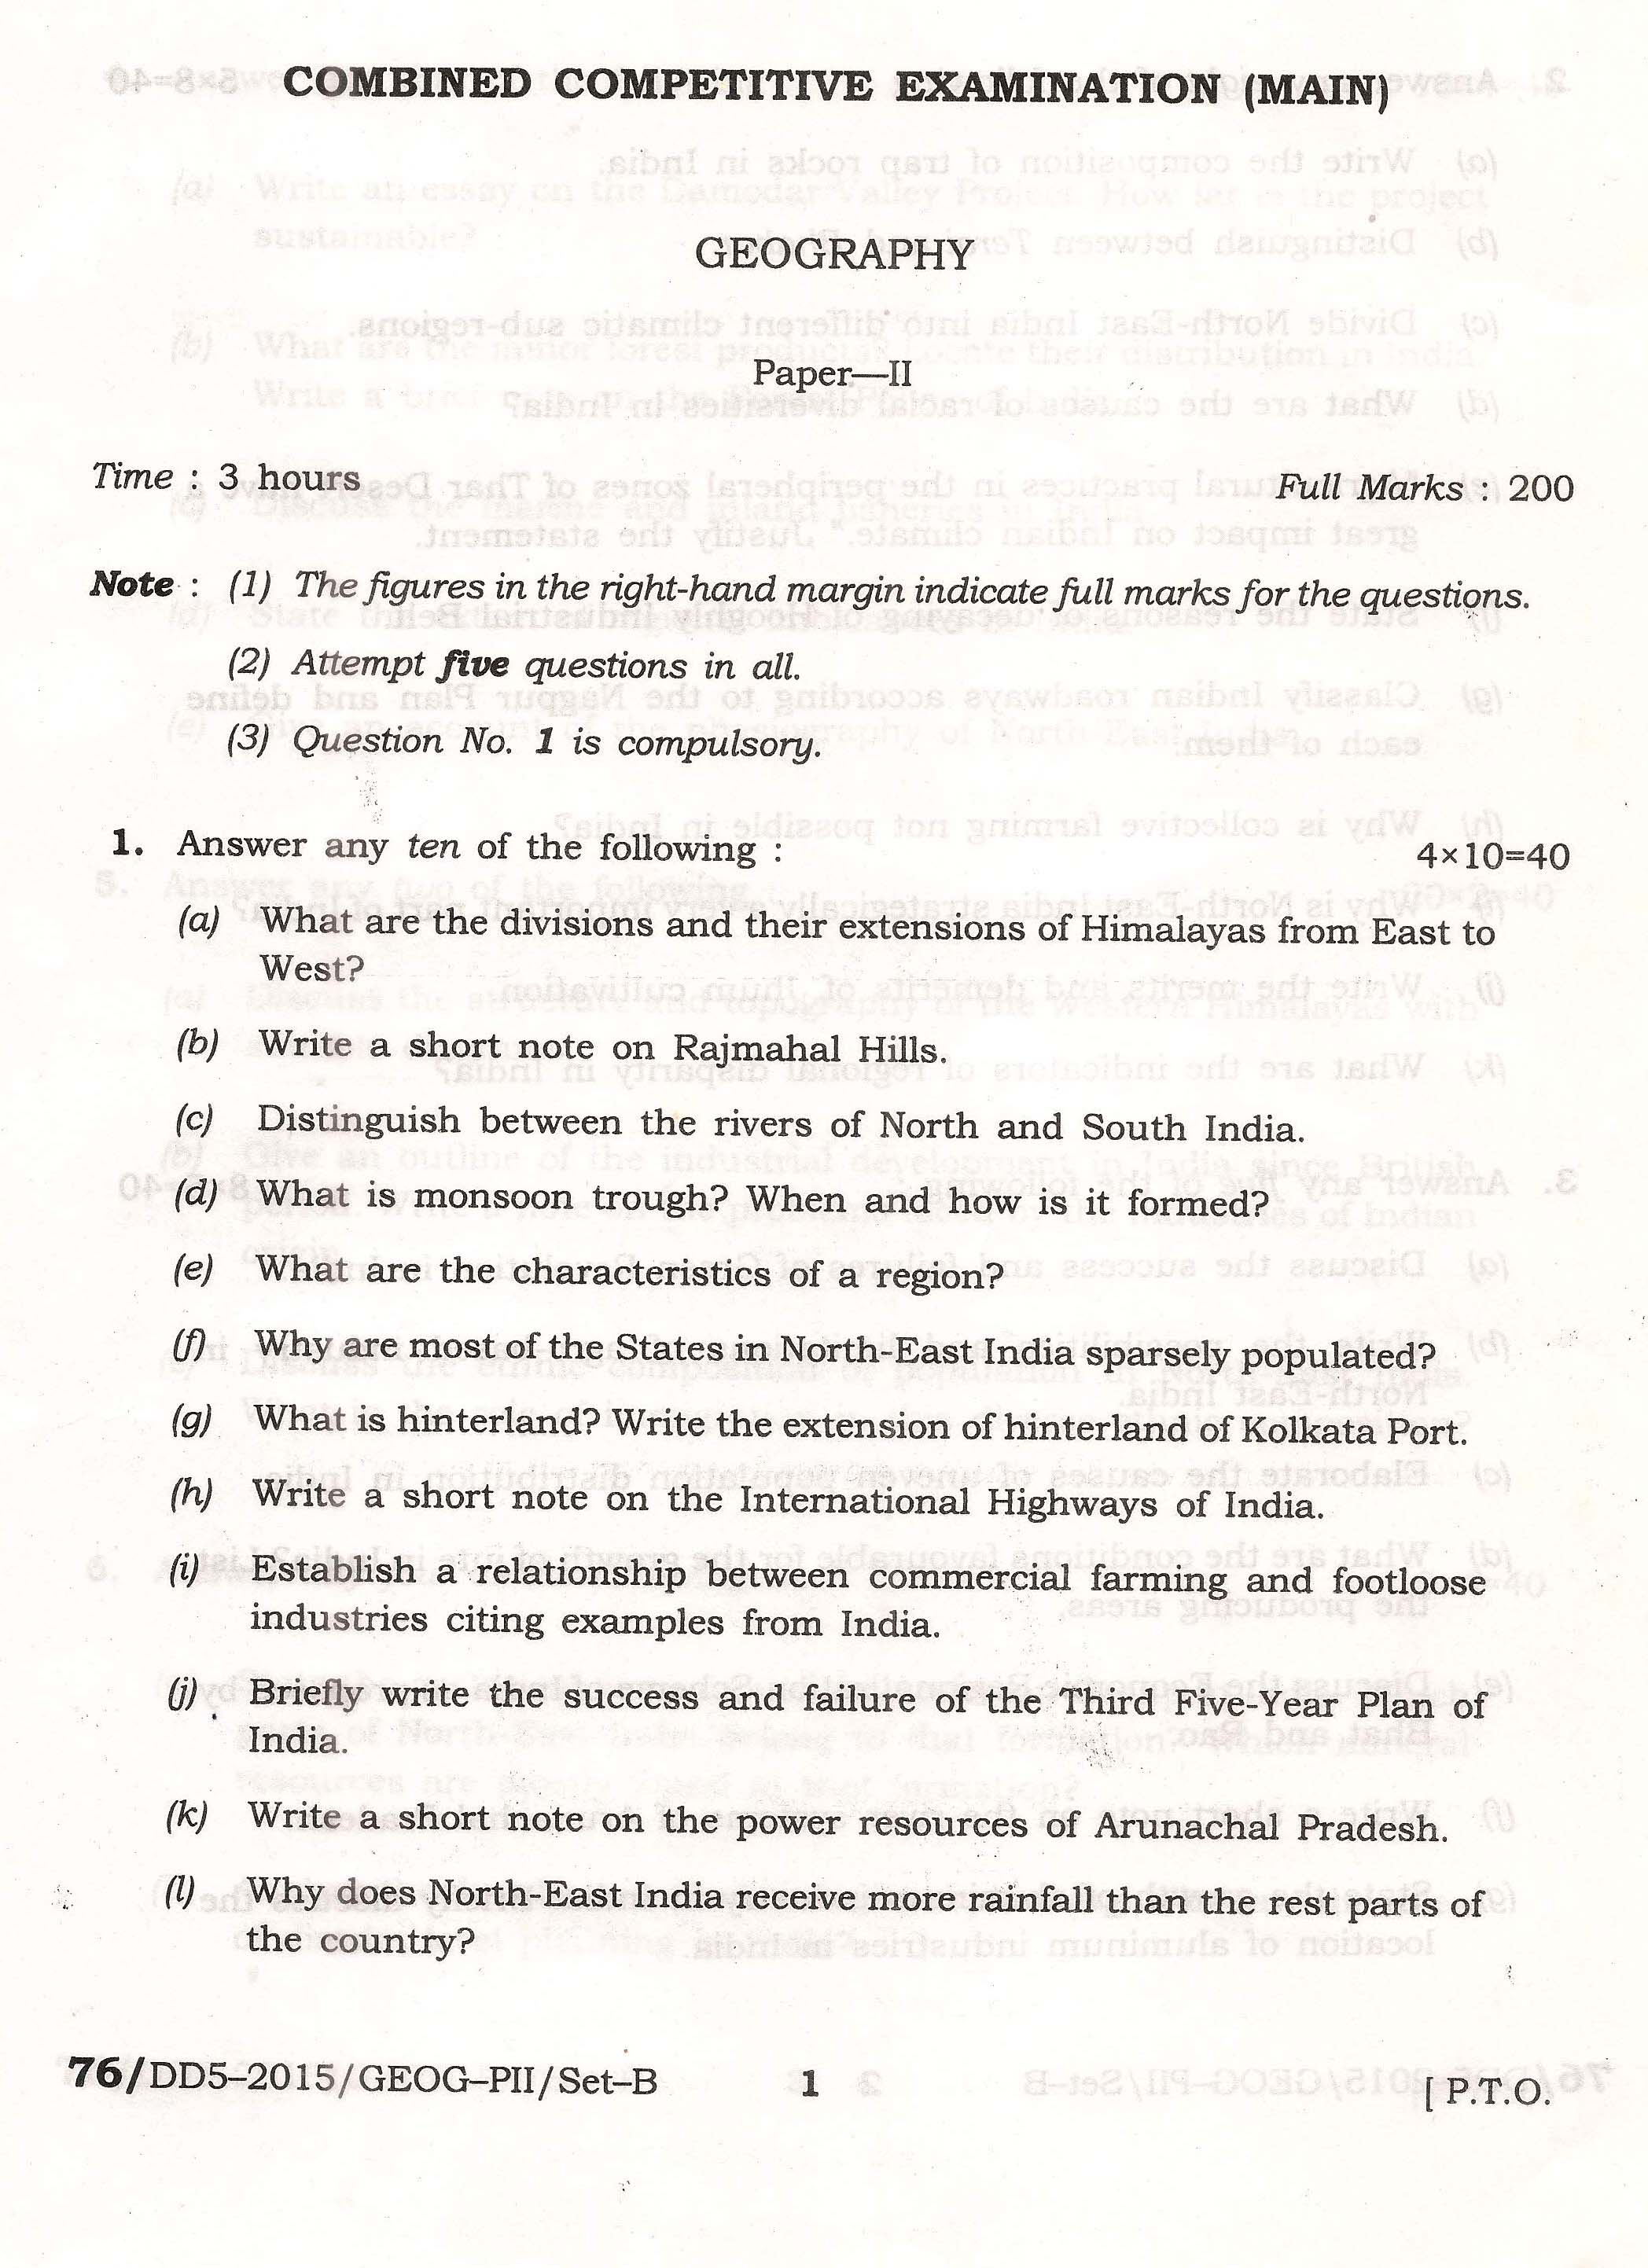 APPSC Combined Competitive Main Exam 2015 Geography Paper II 1